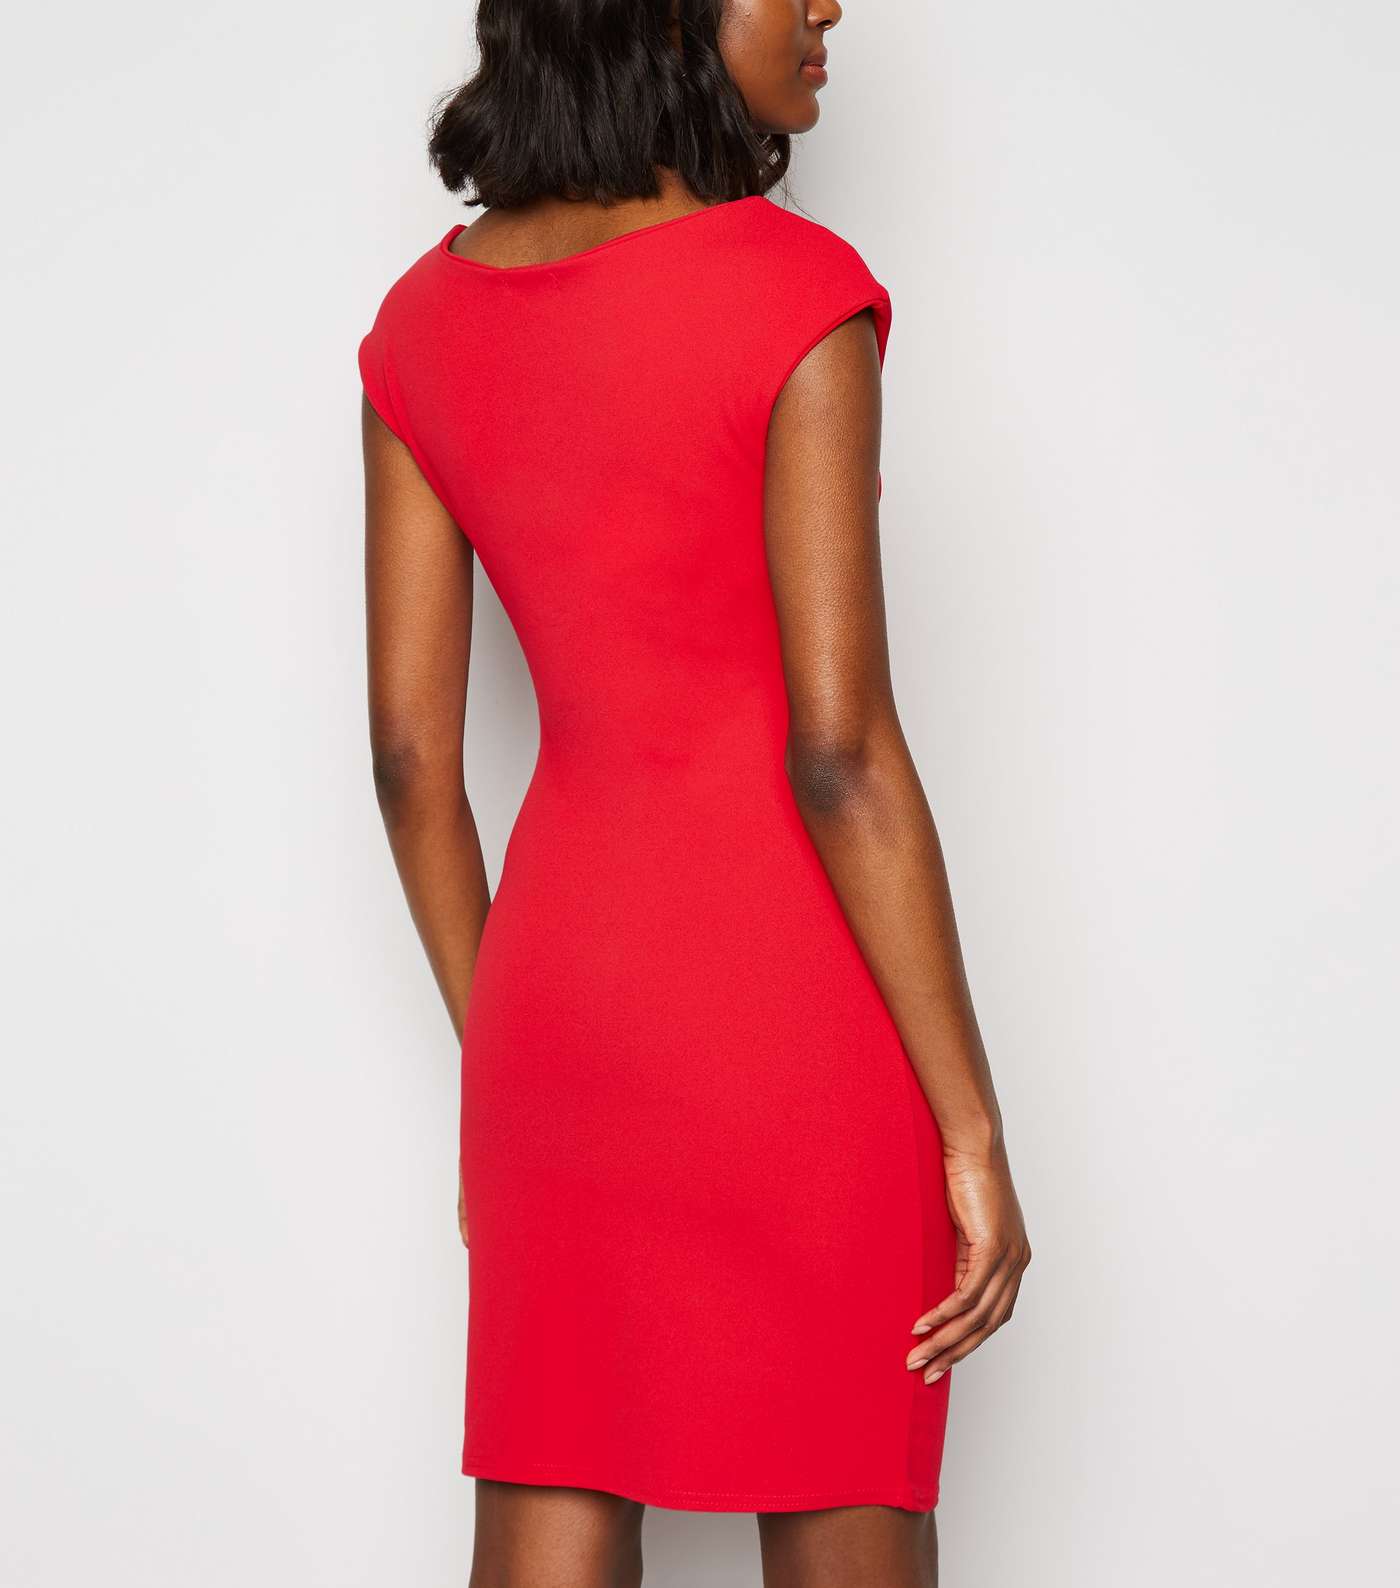 Missfiga Red Cap Sleeve Ruched Bodycon Dress Image 3